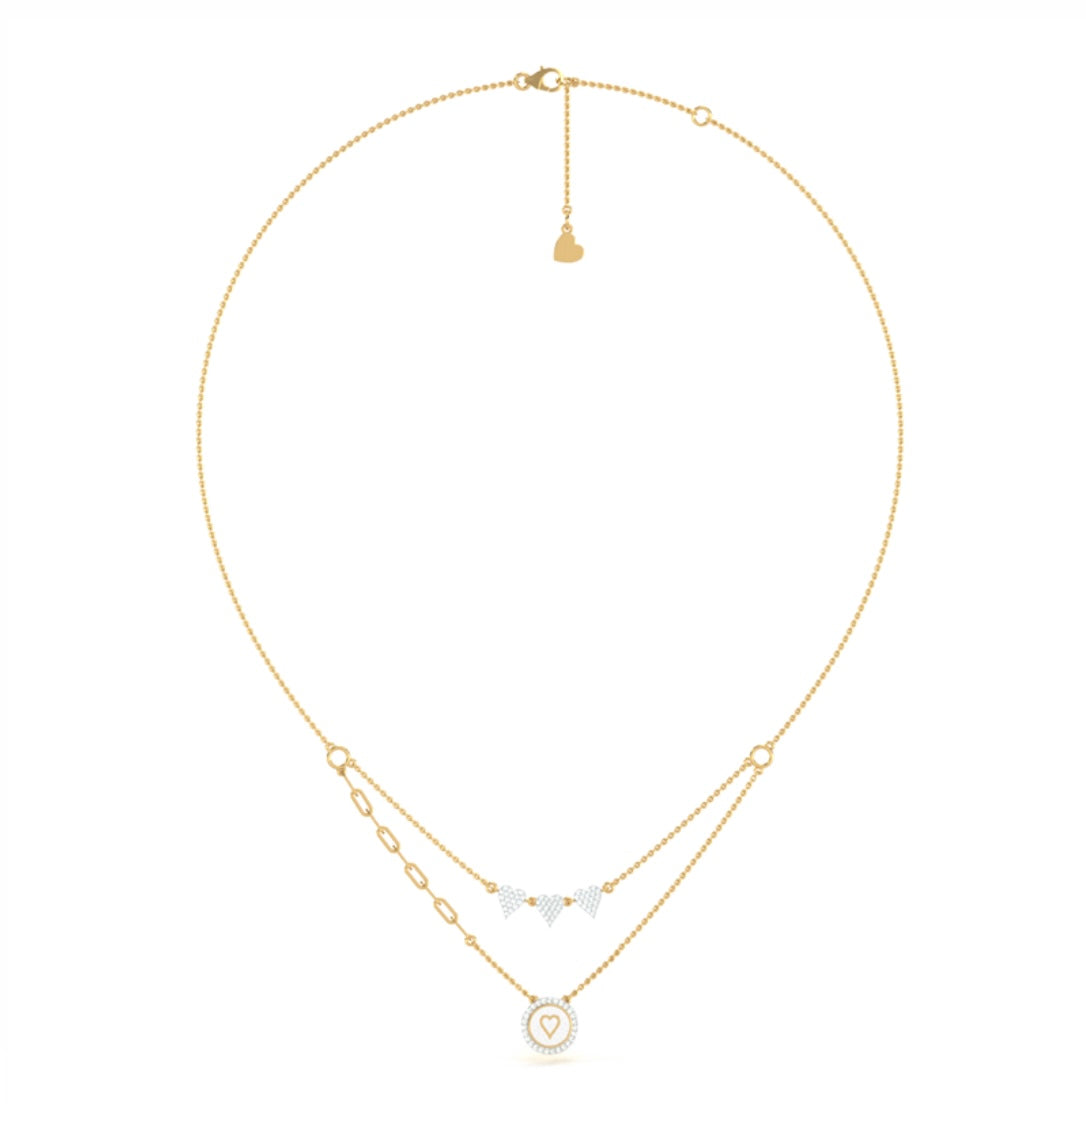 Delicate Joy of My Heart Double Layered Diamond Necklace